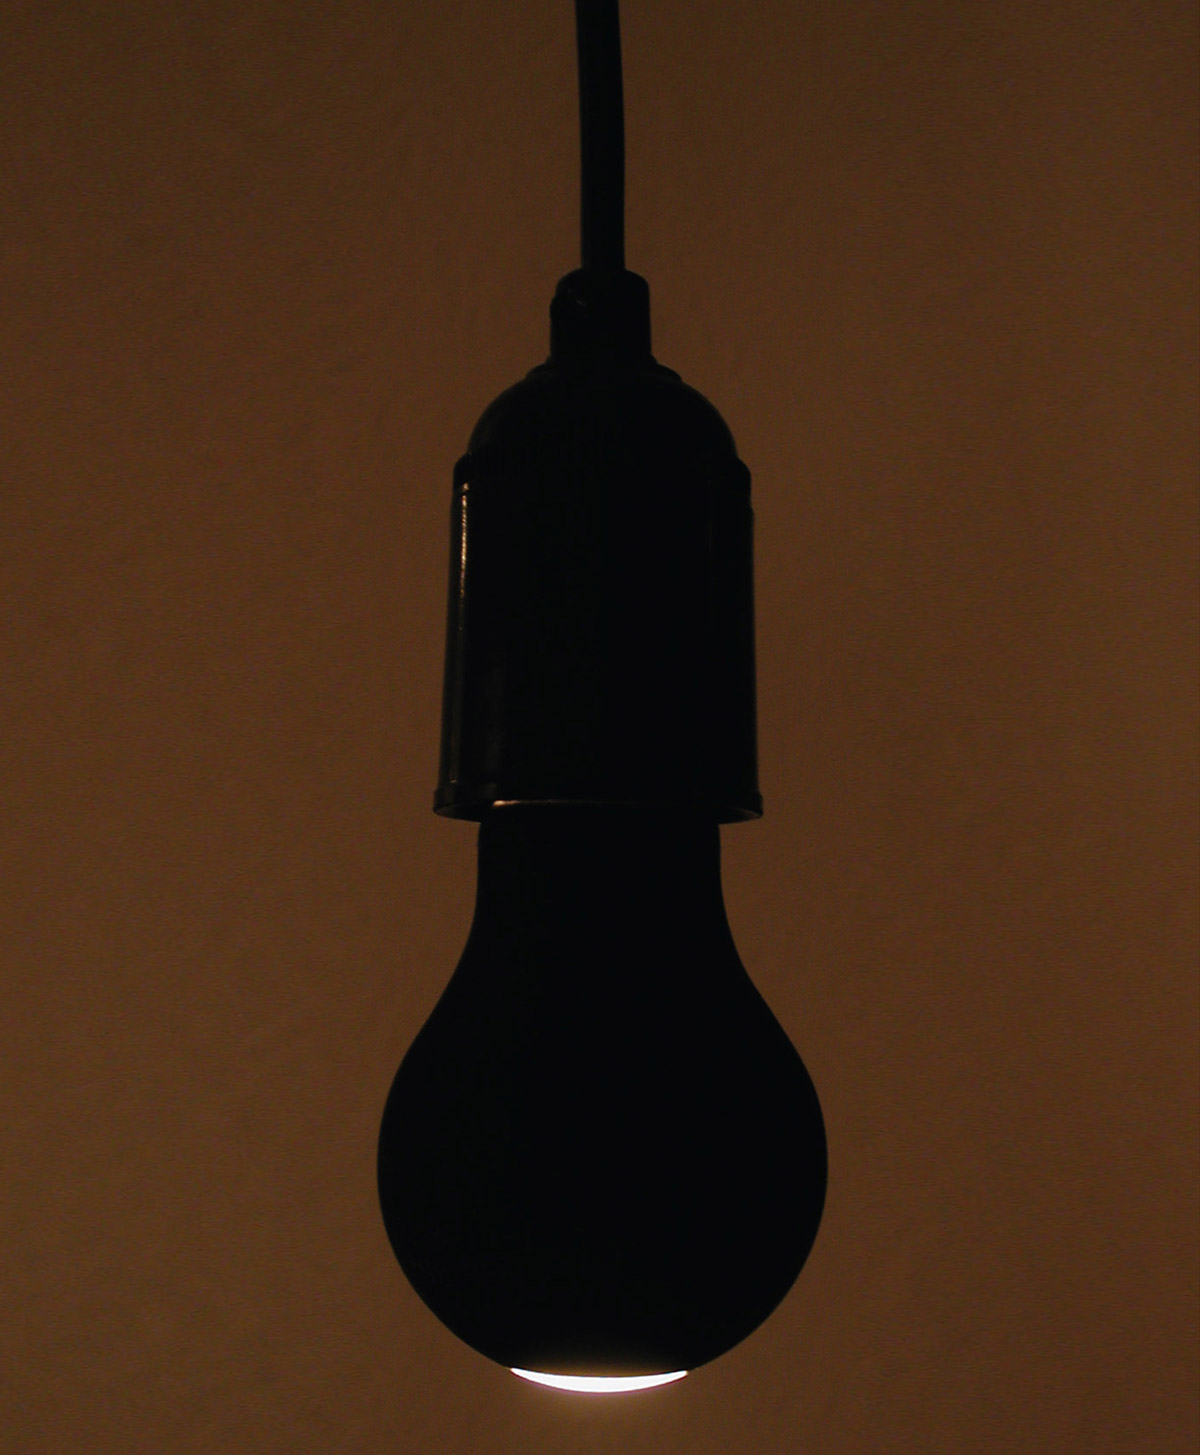 Photograph by Mats Bigert of a Philips Protector Lamp.